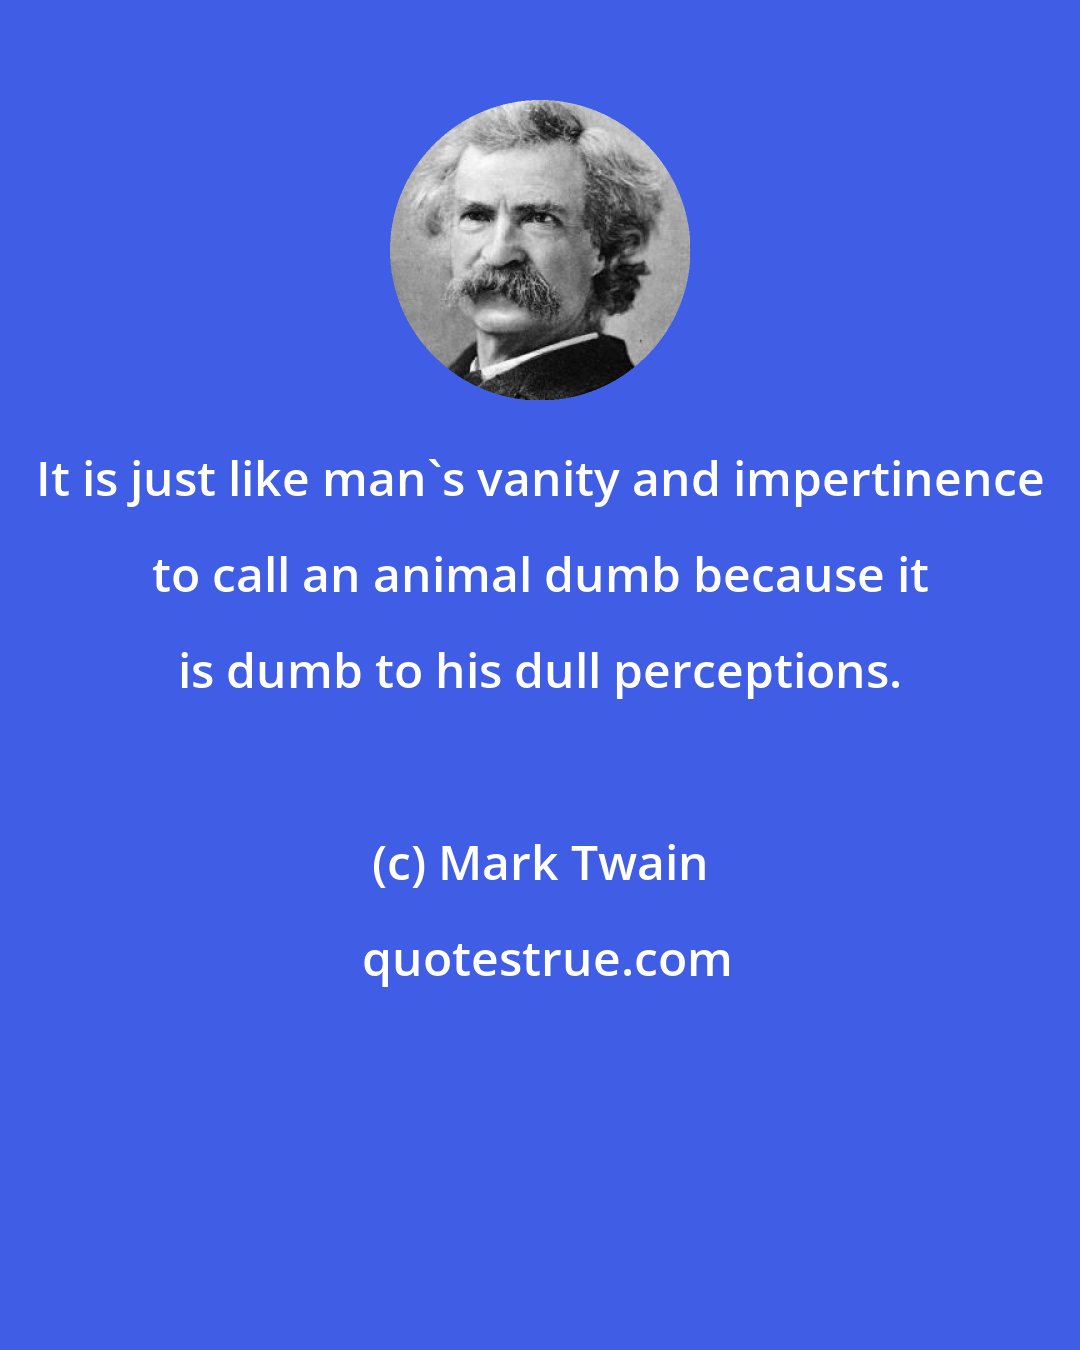 Mark Twain: It is just like man's vanity and impertinence to call an animal dumb because it is dumb to his dull perceptions.